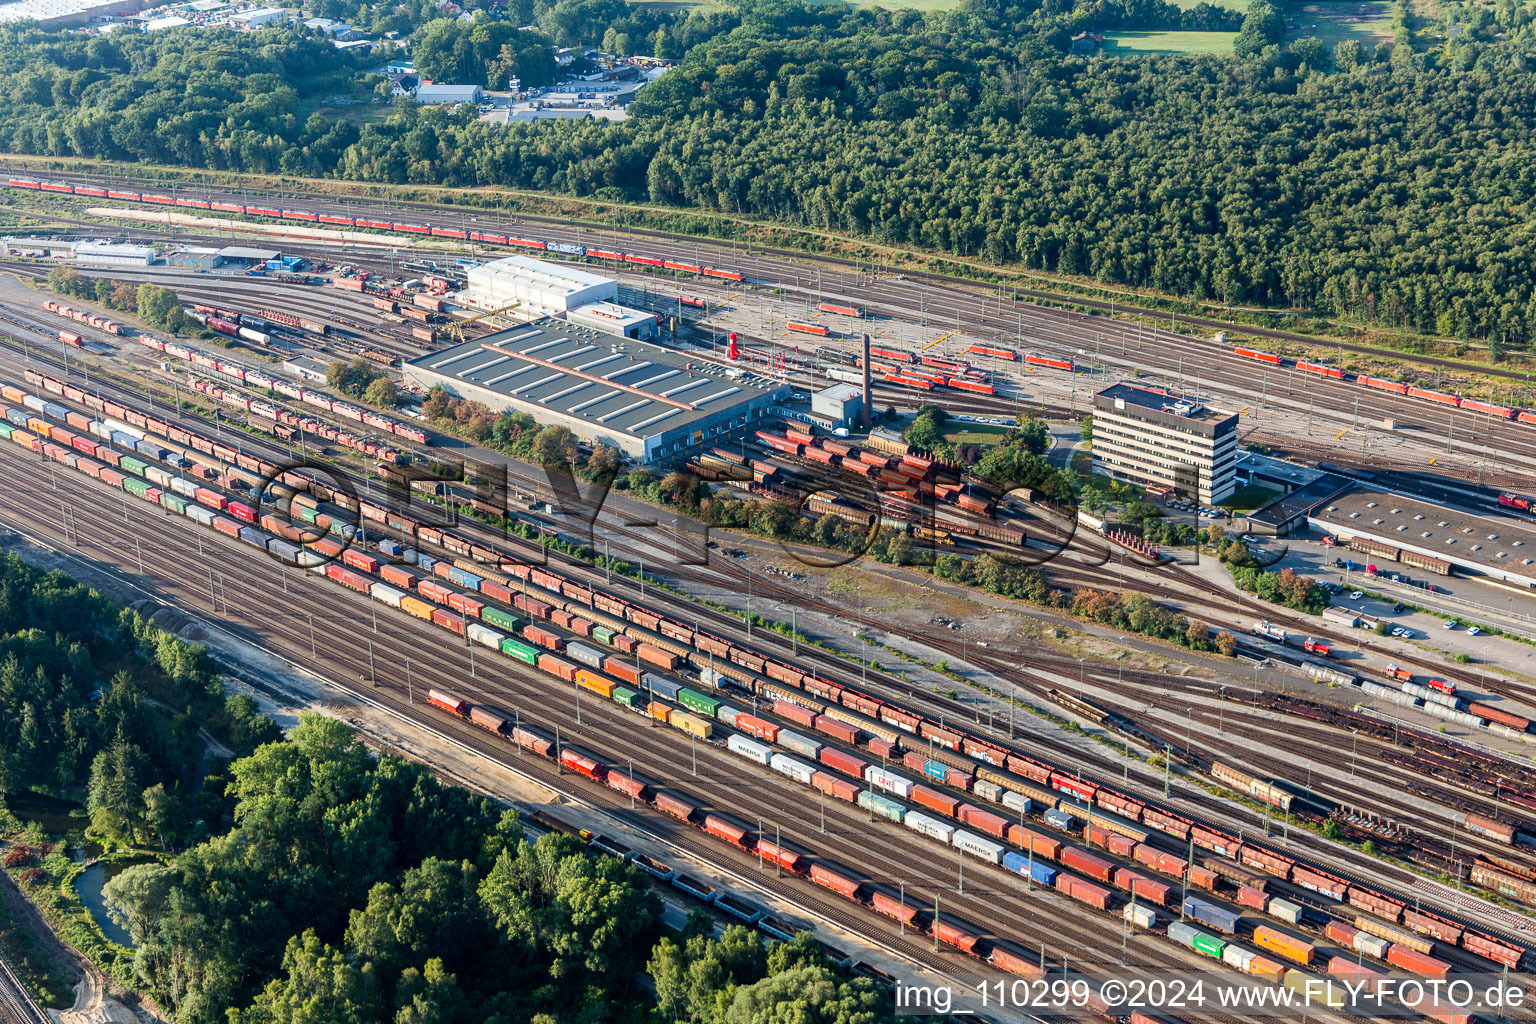 Marshalling yard and freight station Maschen of the Deutsche Bahn in the district Maschen in Seevetal in the state Lower Saxony, Germany viewn from the air